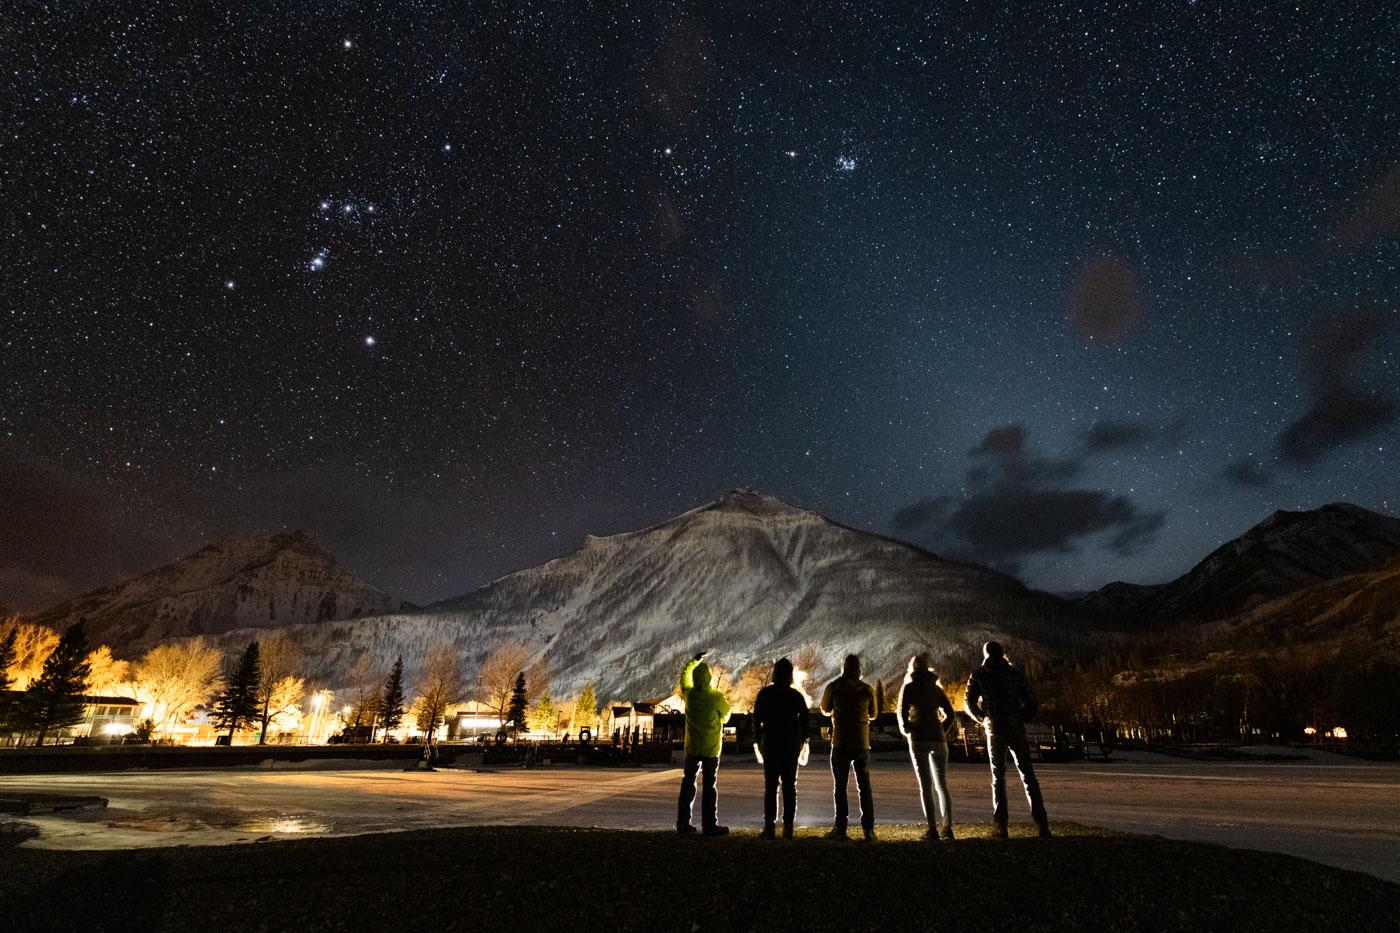 Starry Skies as seen from the Waterton Townsite - Photo Courtesy Monika Deviat Photography